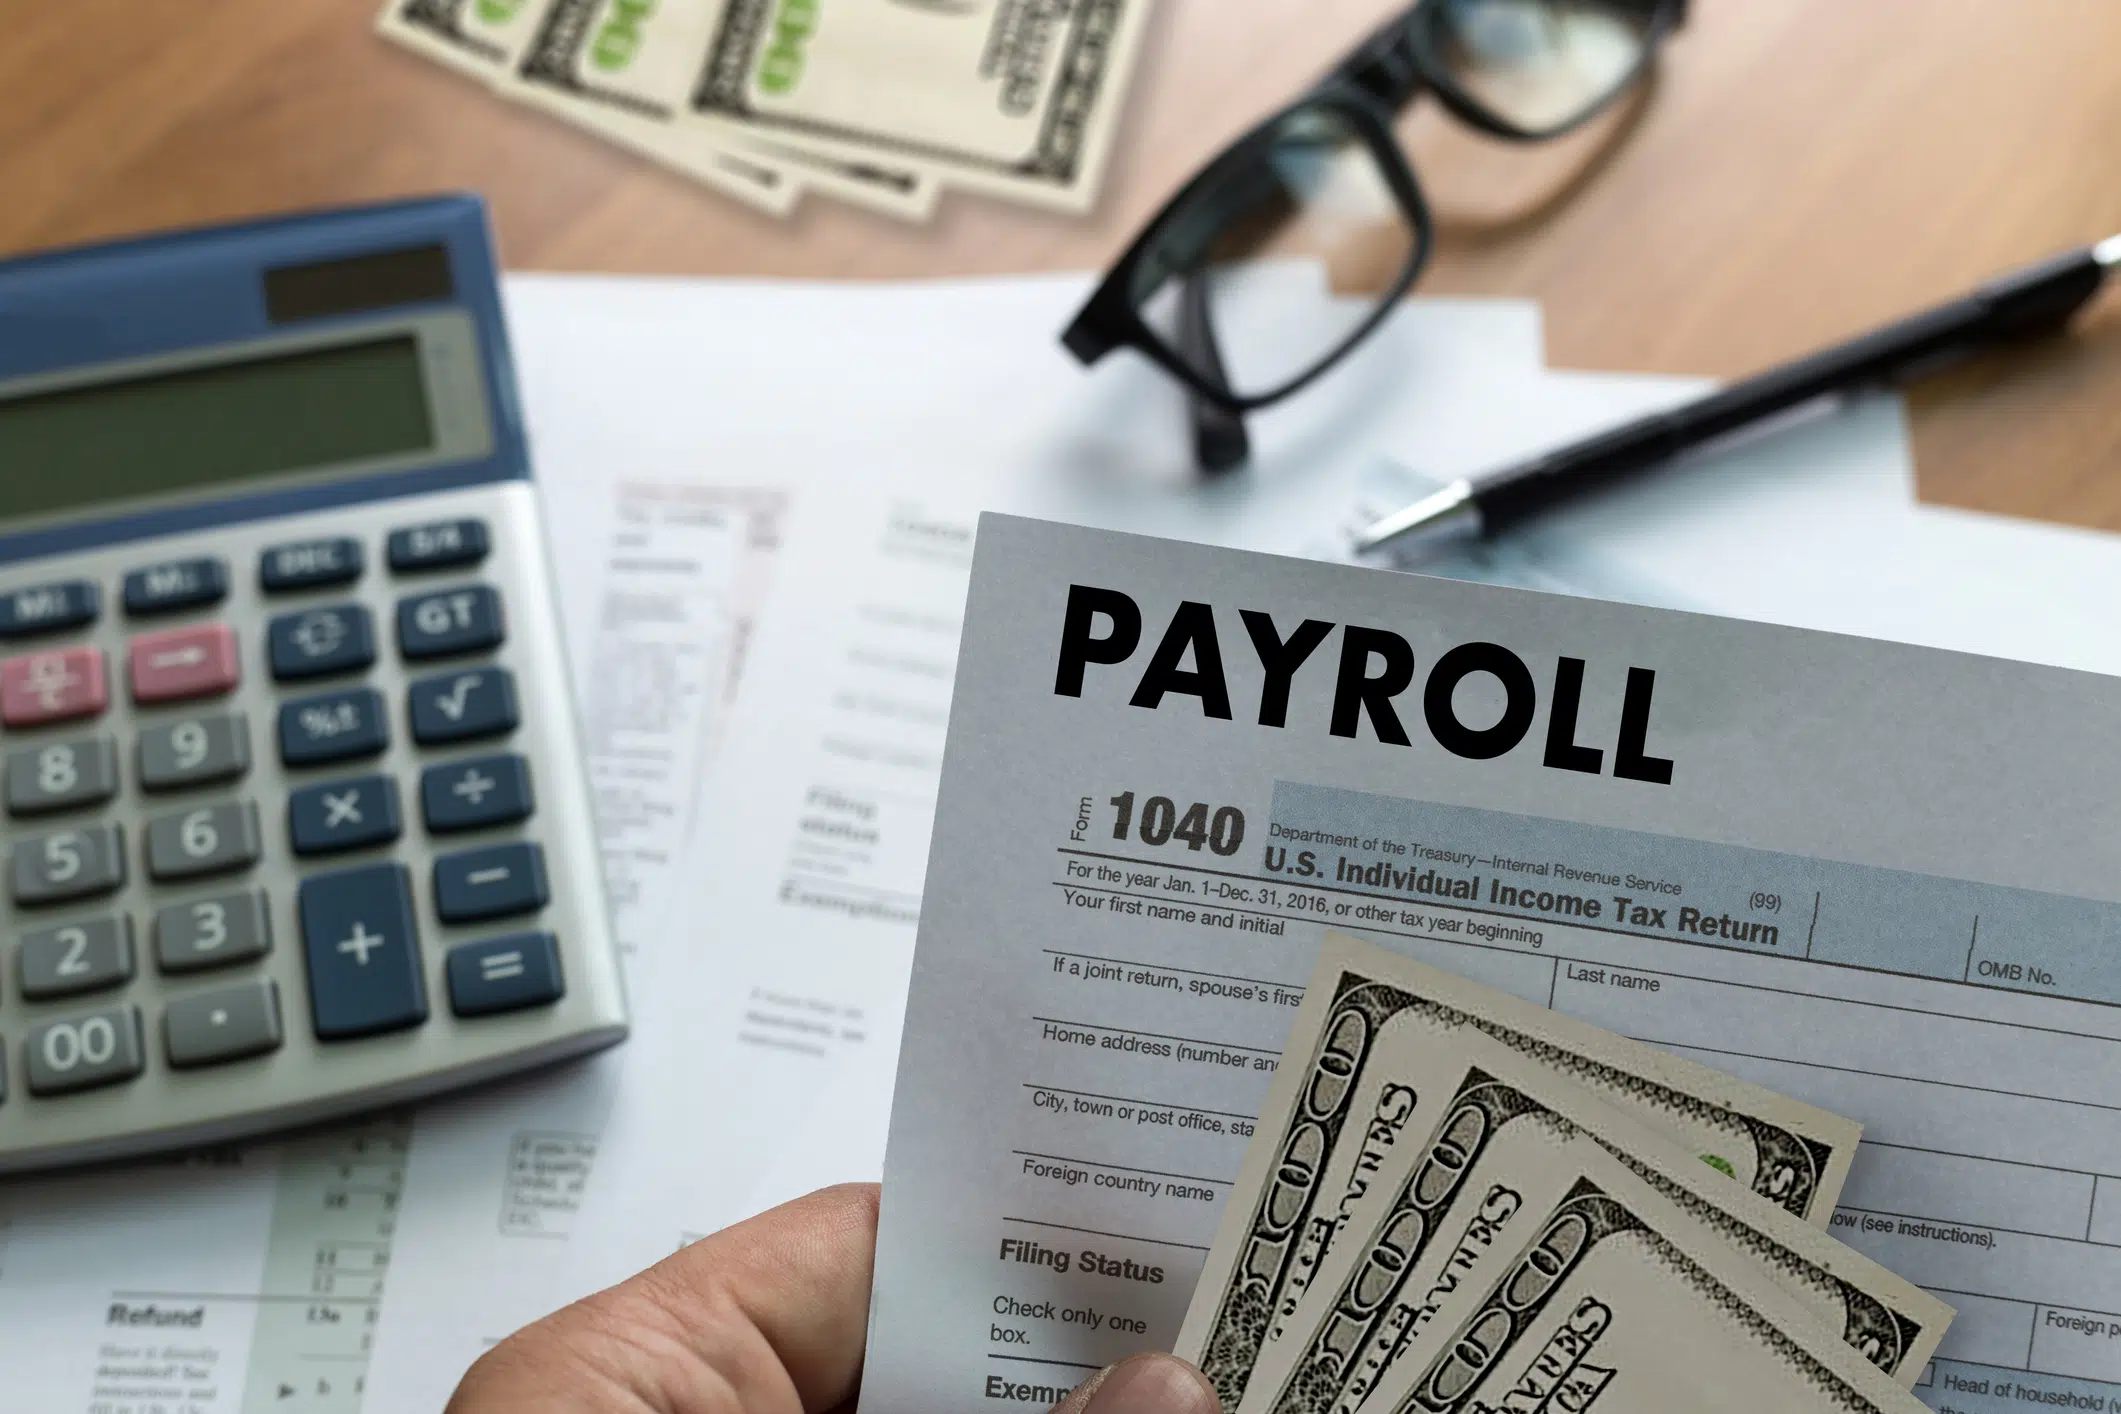 What Can a Payroll Service Do for You?